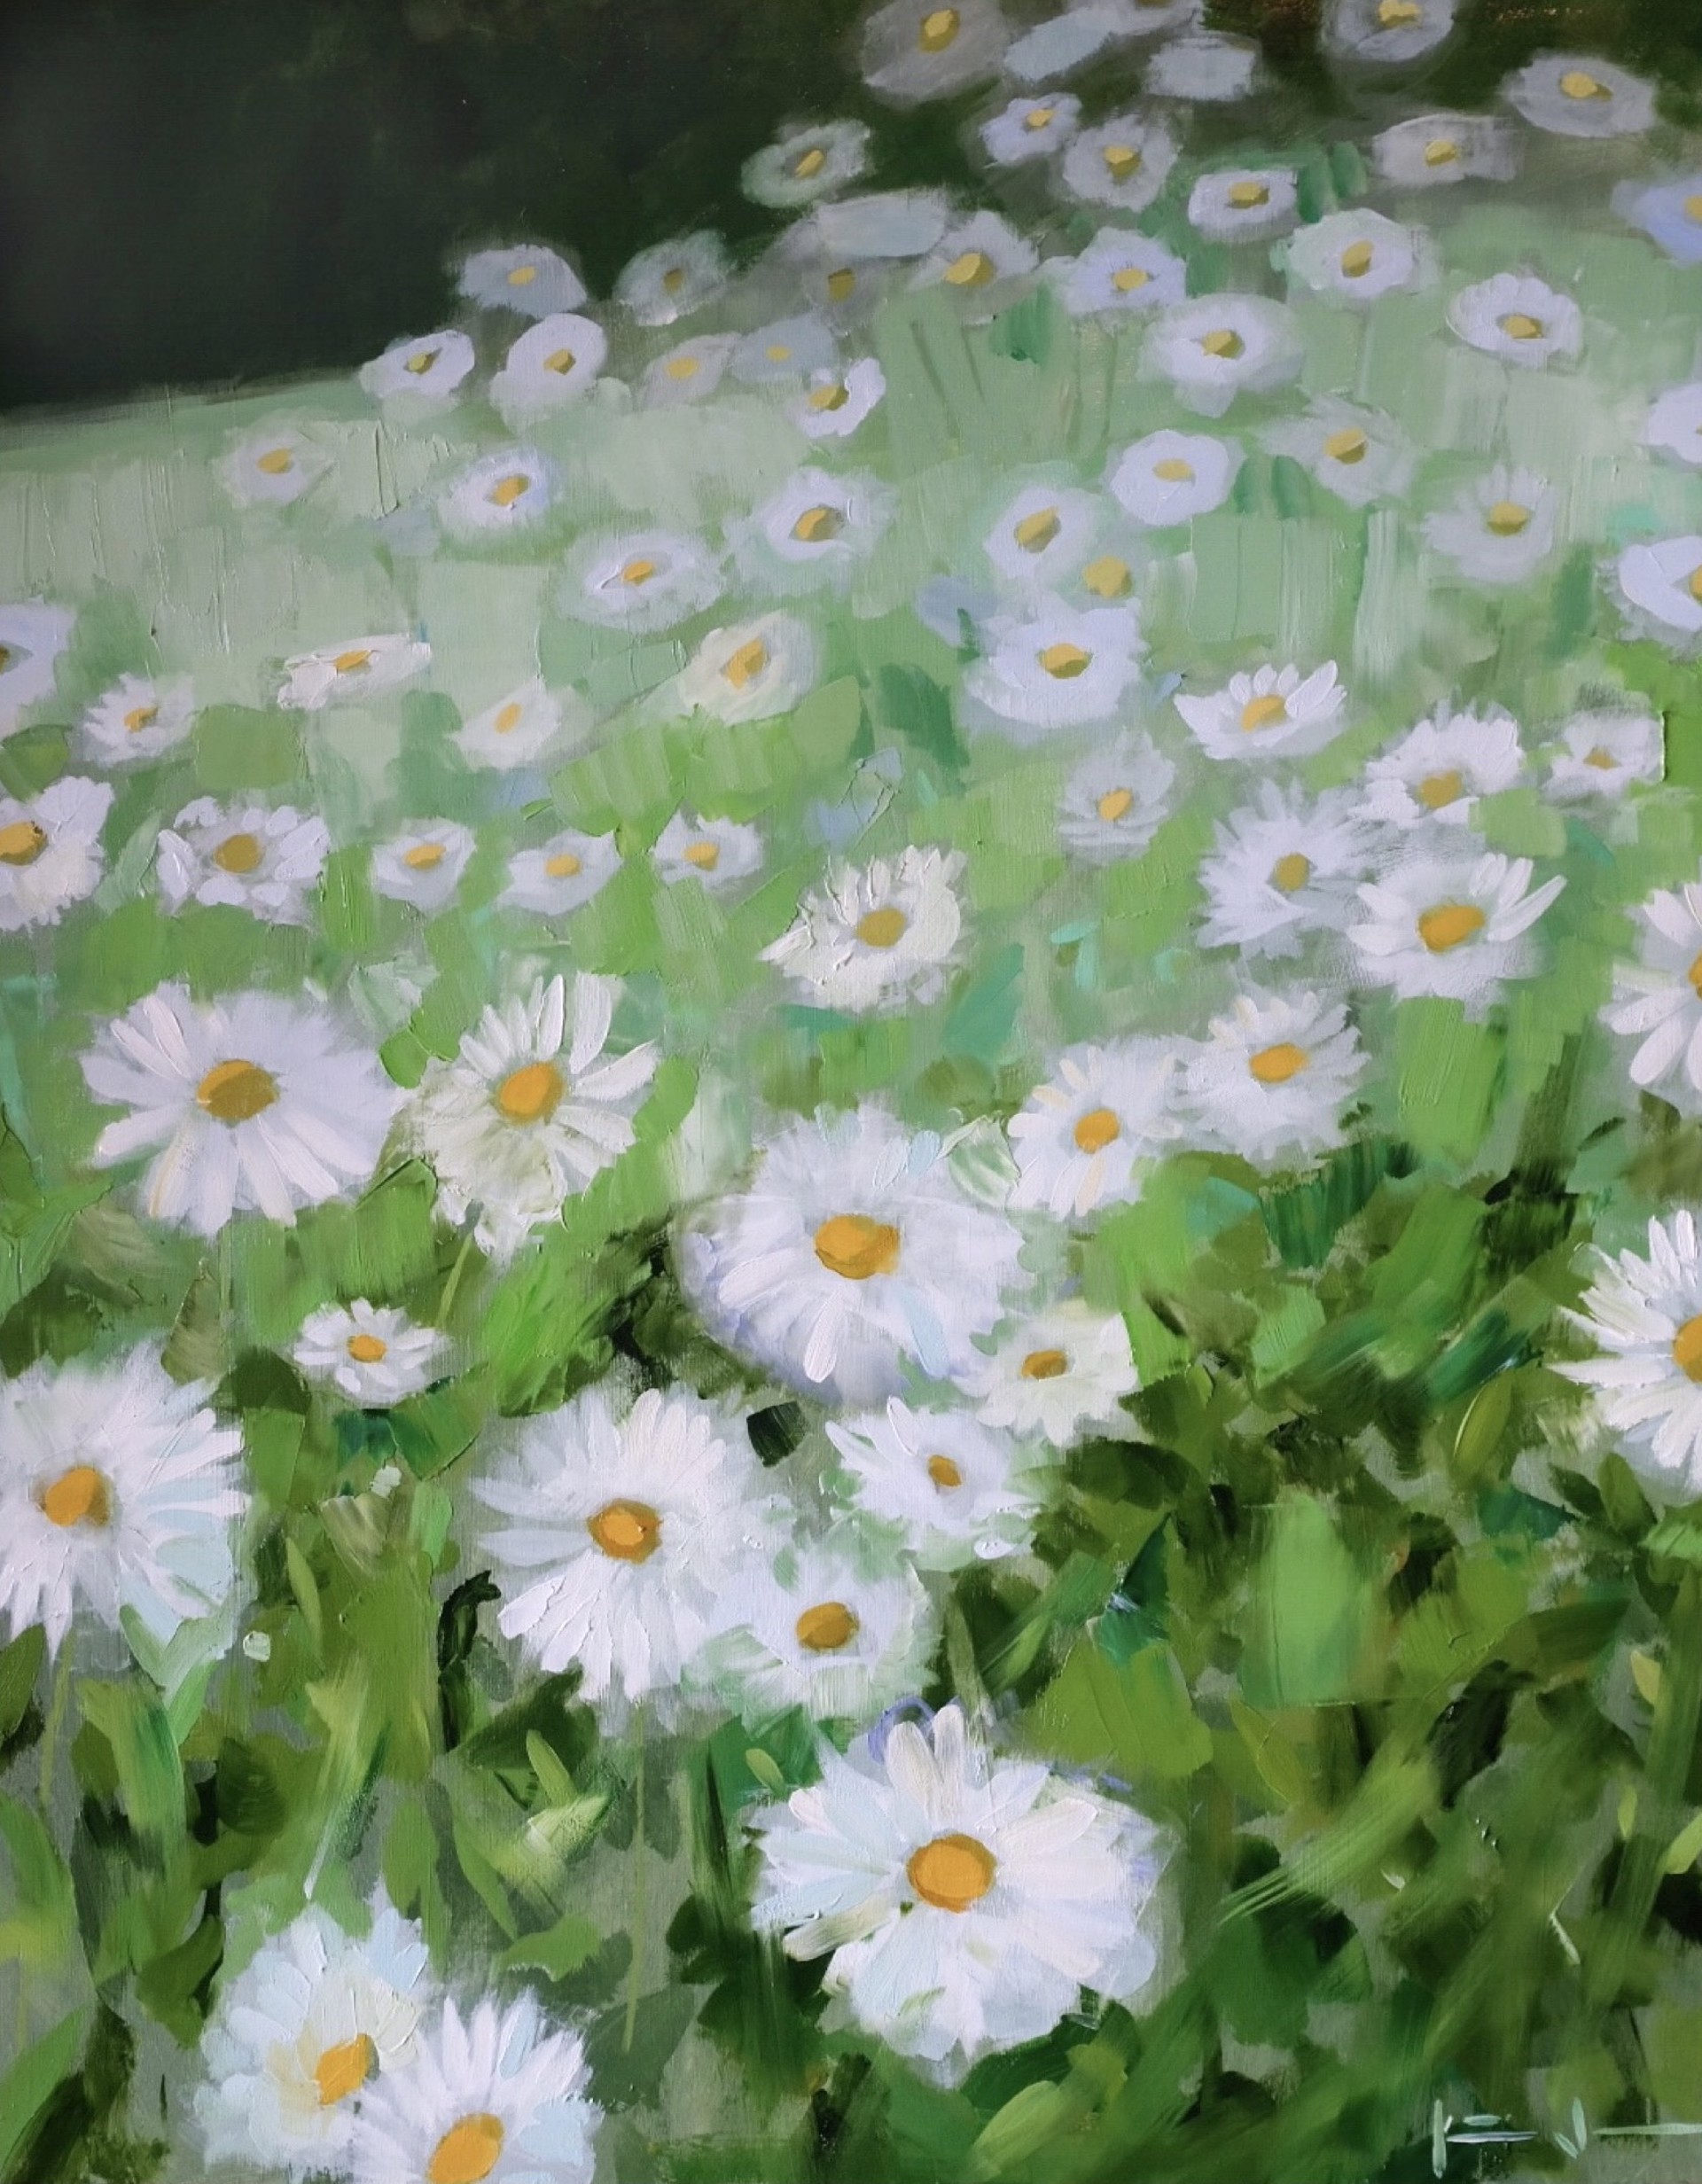 Daisy Dream by Katie Jacobson